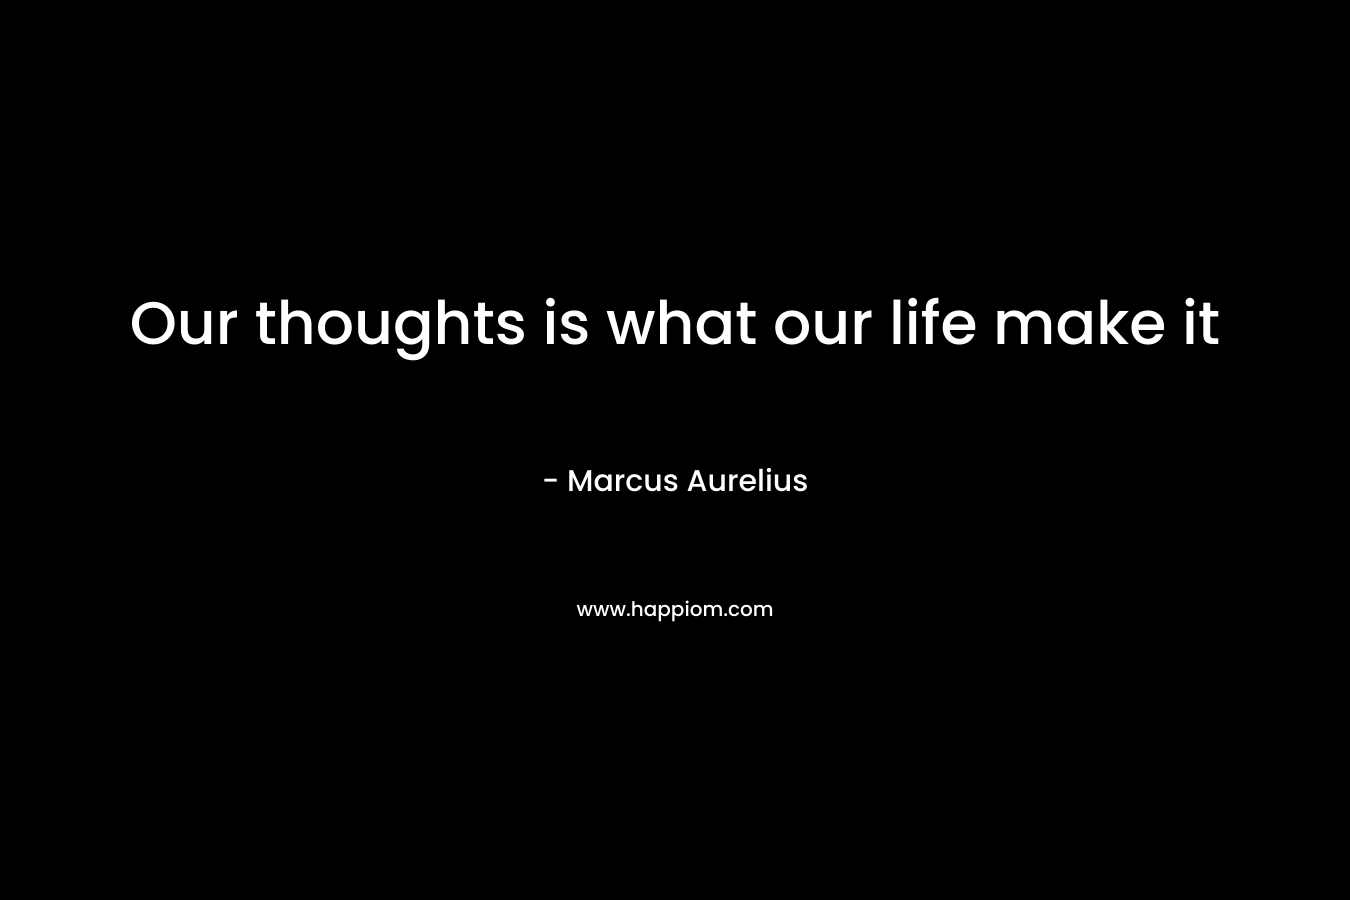 Our thoughts is what our life make it